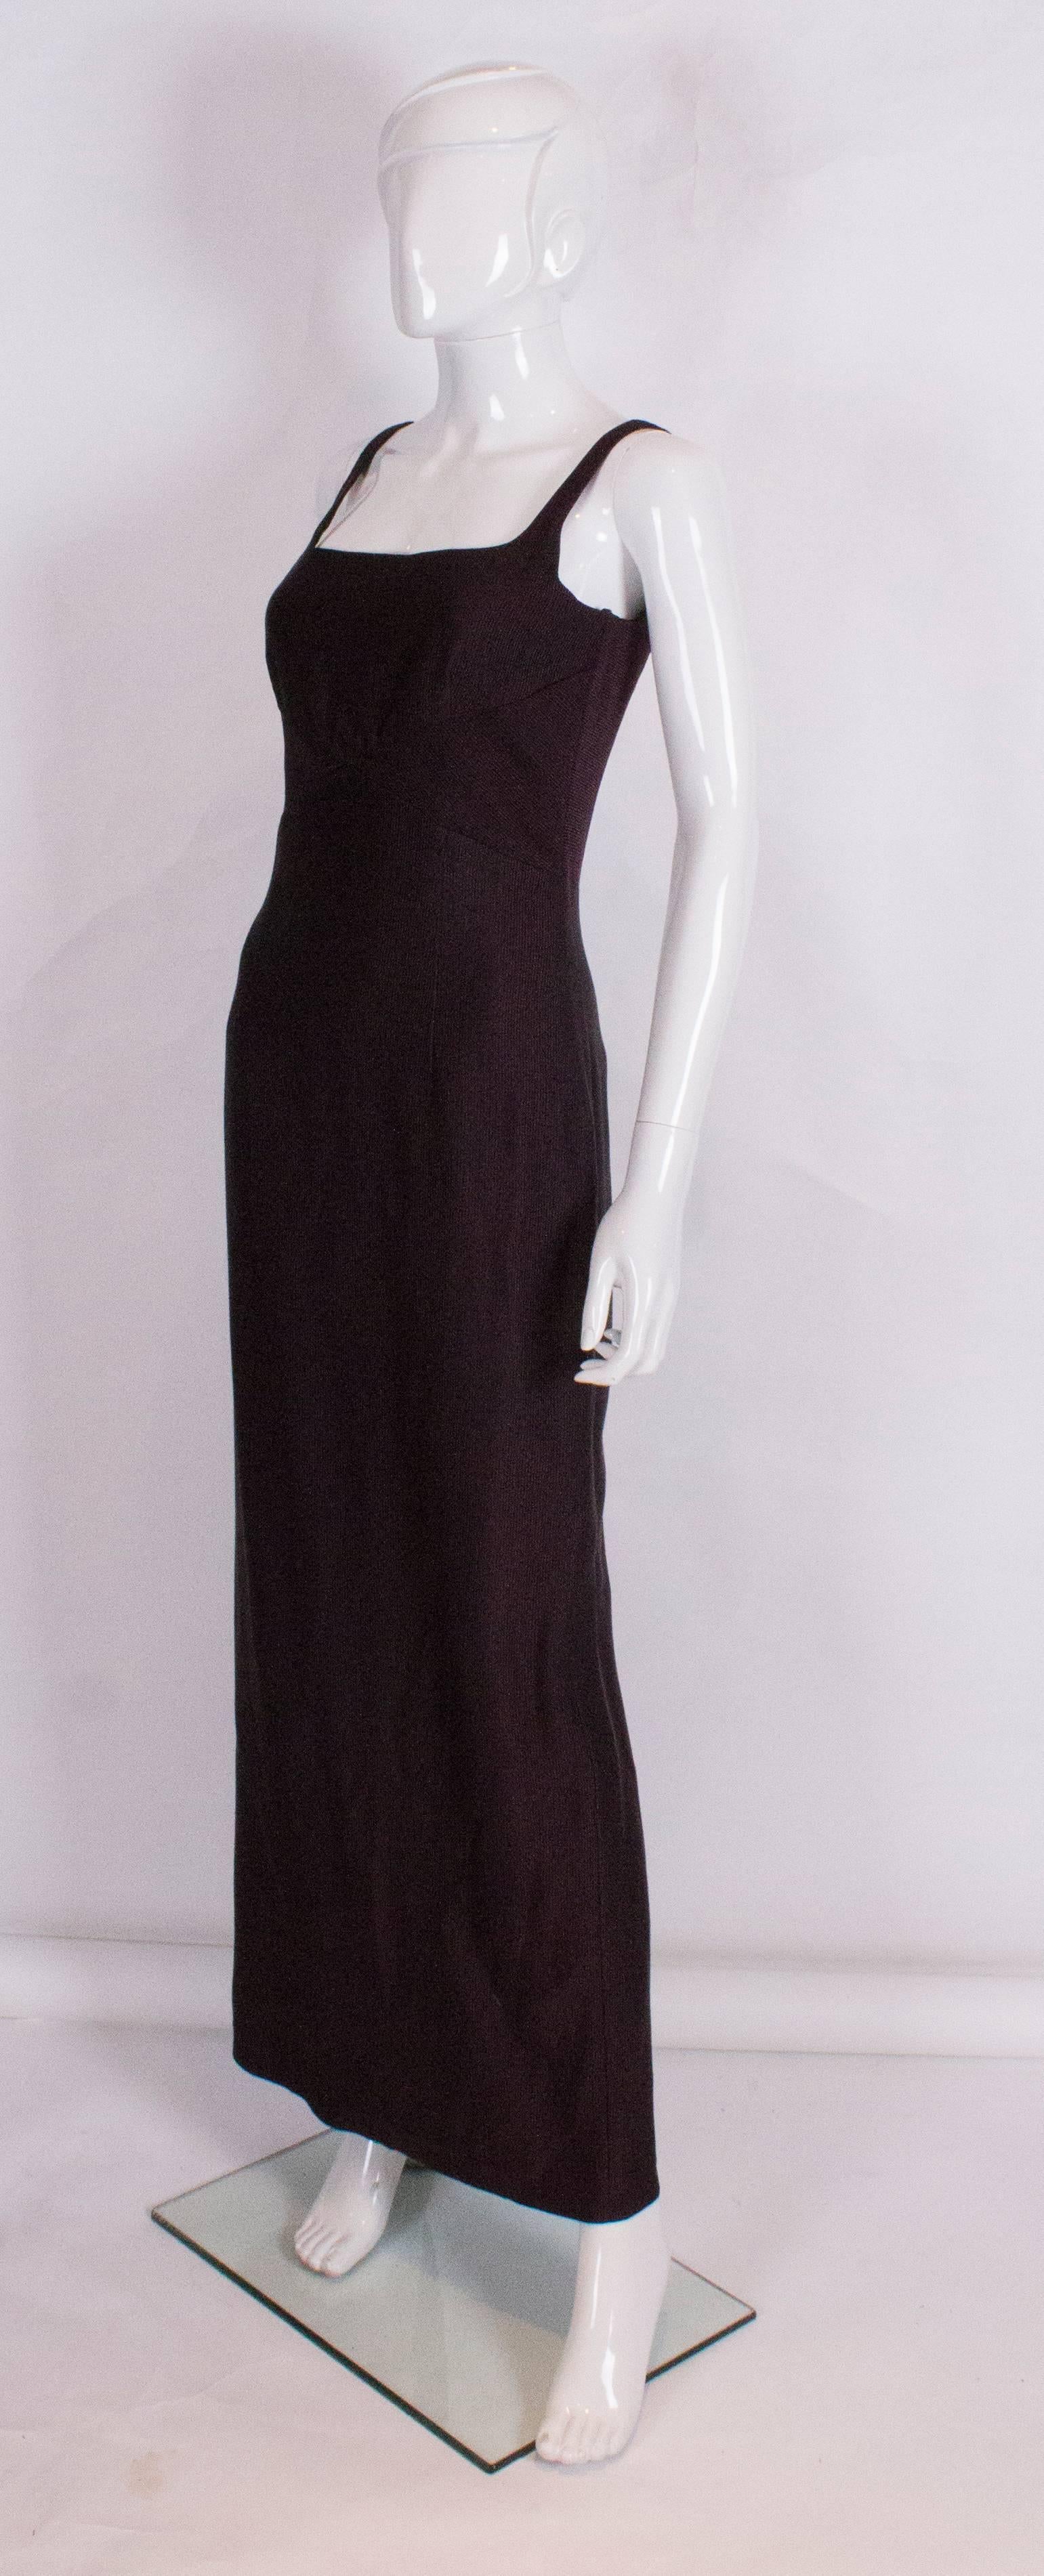 An elegant aubergine colour gown by Maska Luxe .The dress is in a ribbed wool/silk mix fabric, and has a scoop neckline at the front and back. The dress is fully lined and has a 23'' slit at the back.